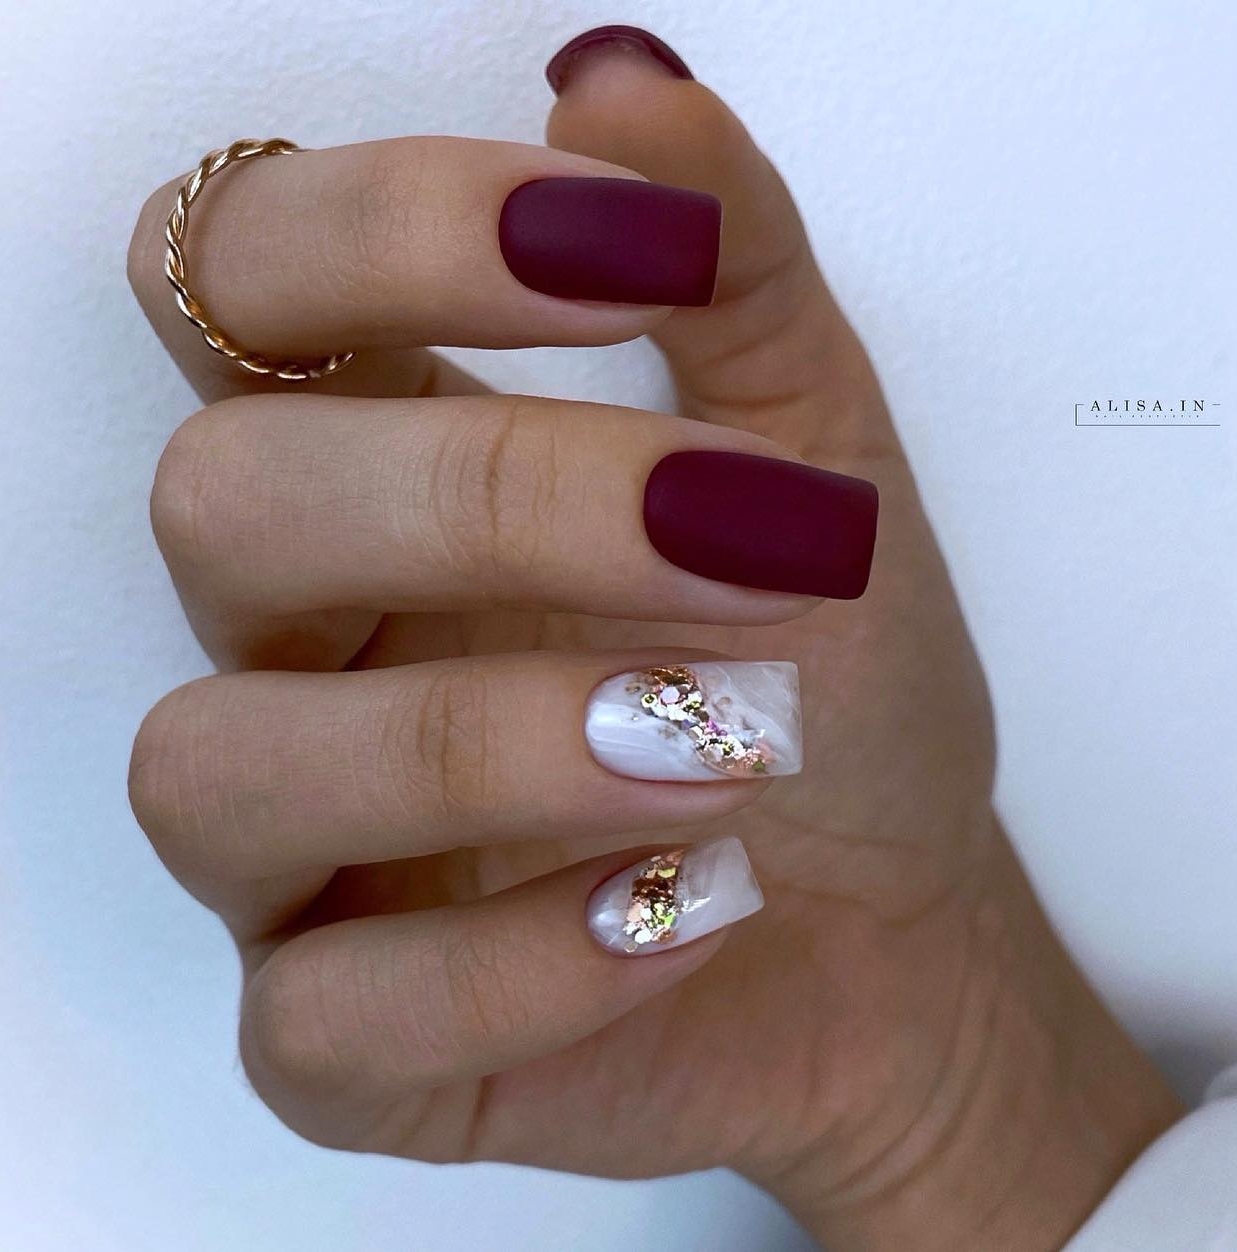 43 Chic Burgundy Nails You'll Fall in Love With - StayGlam